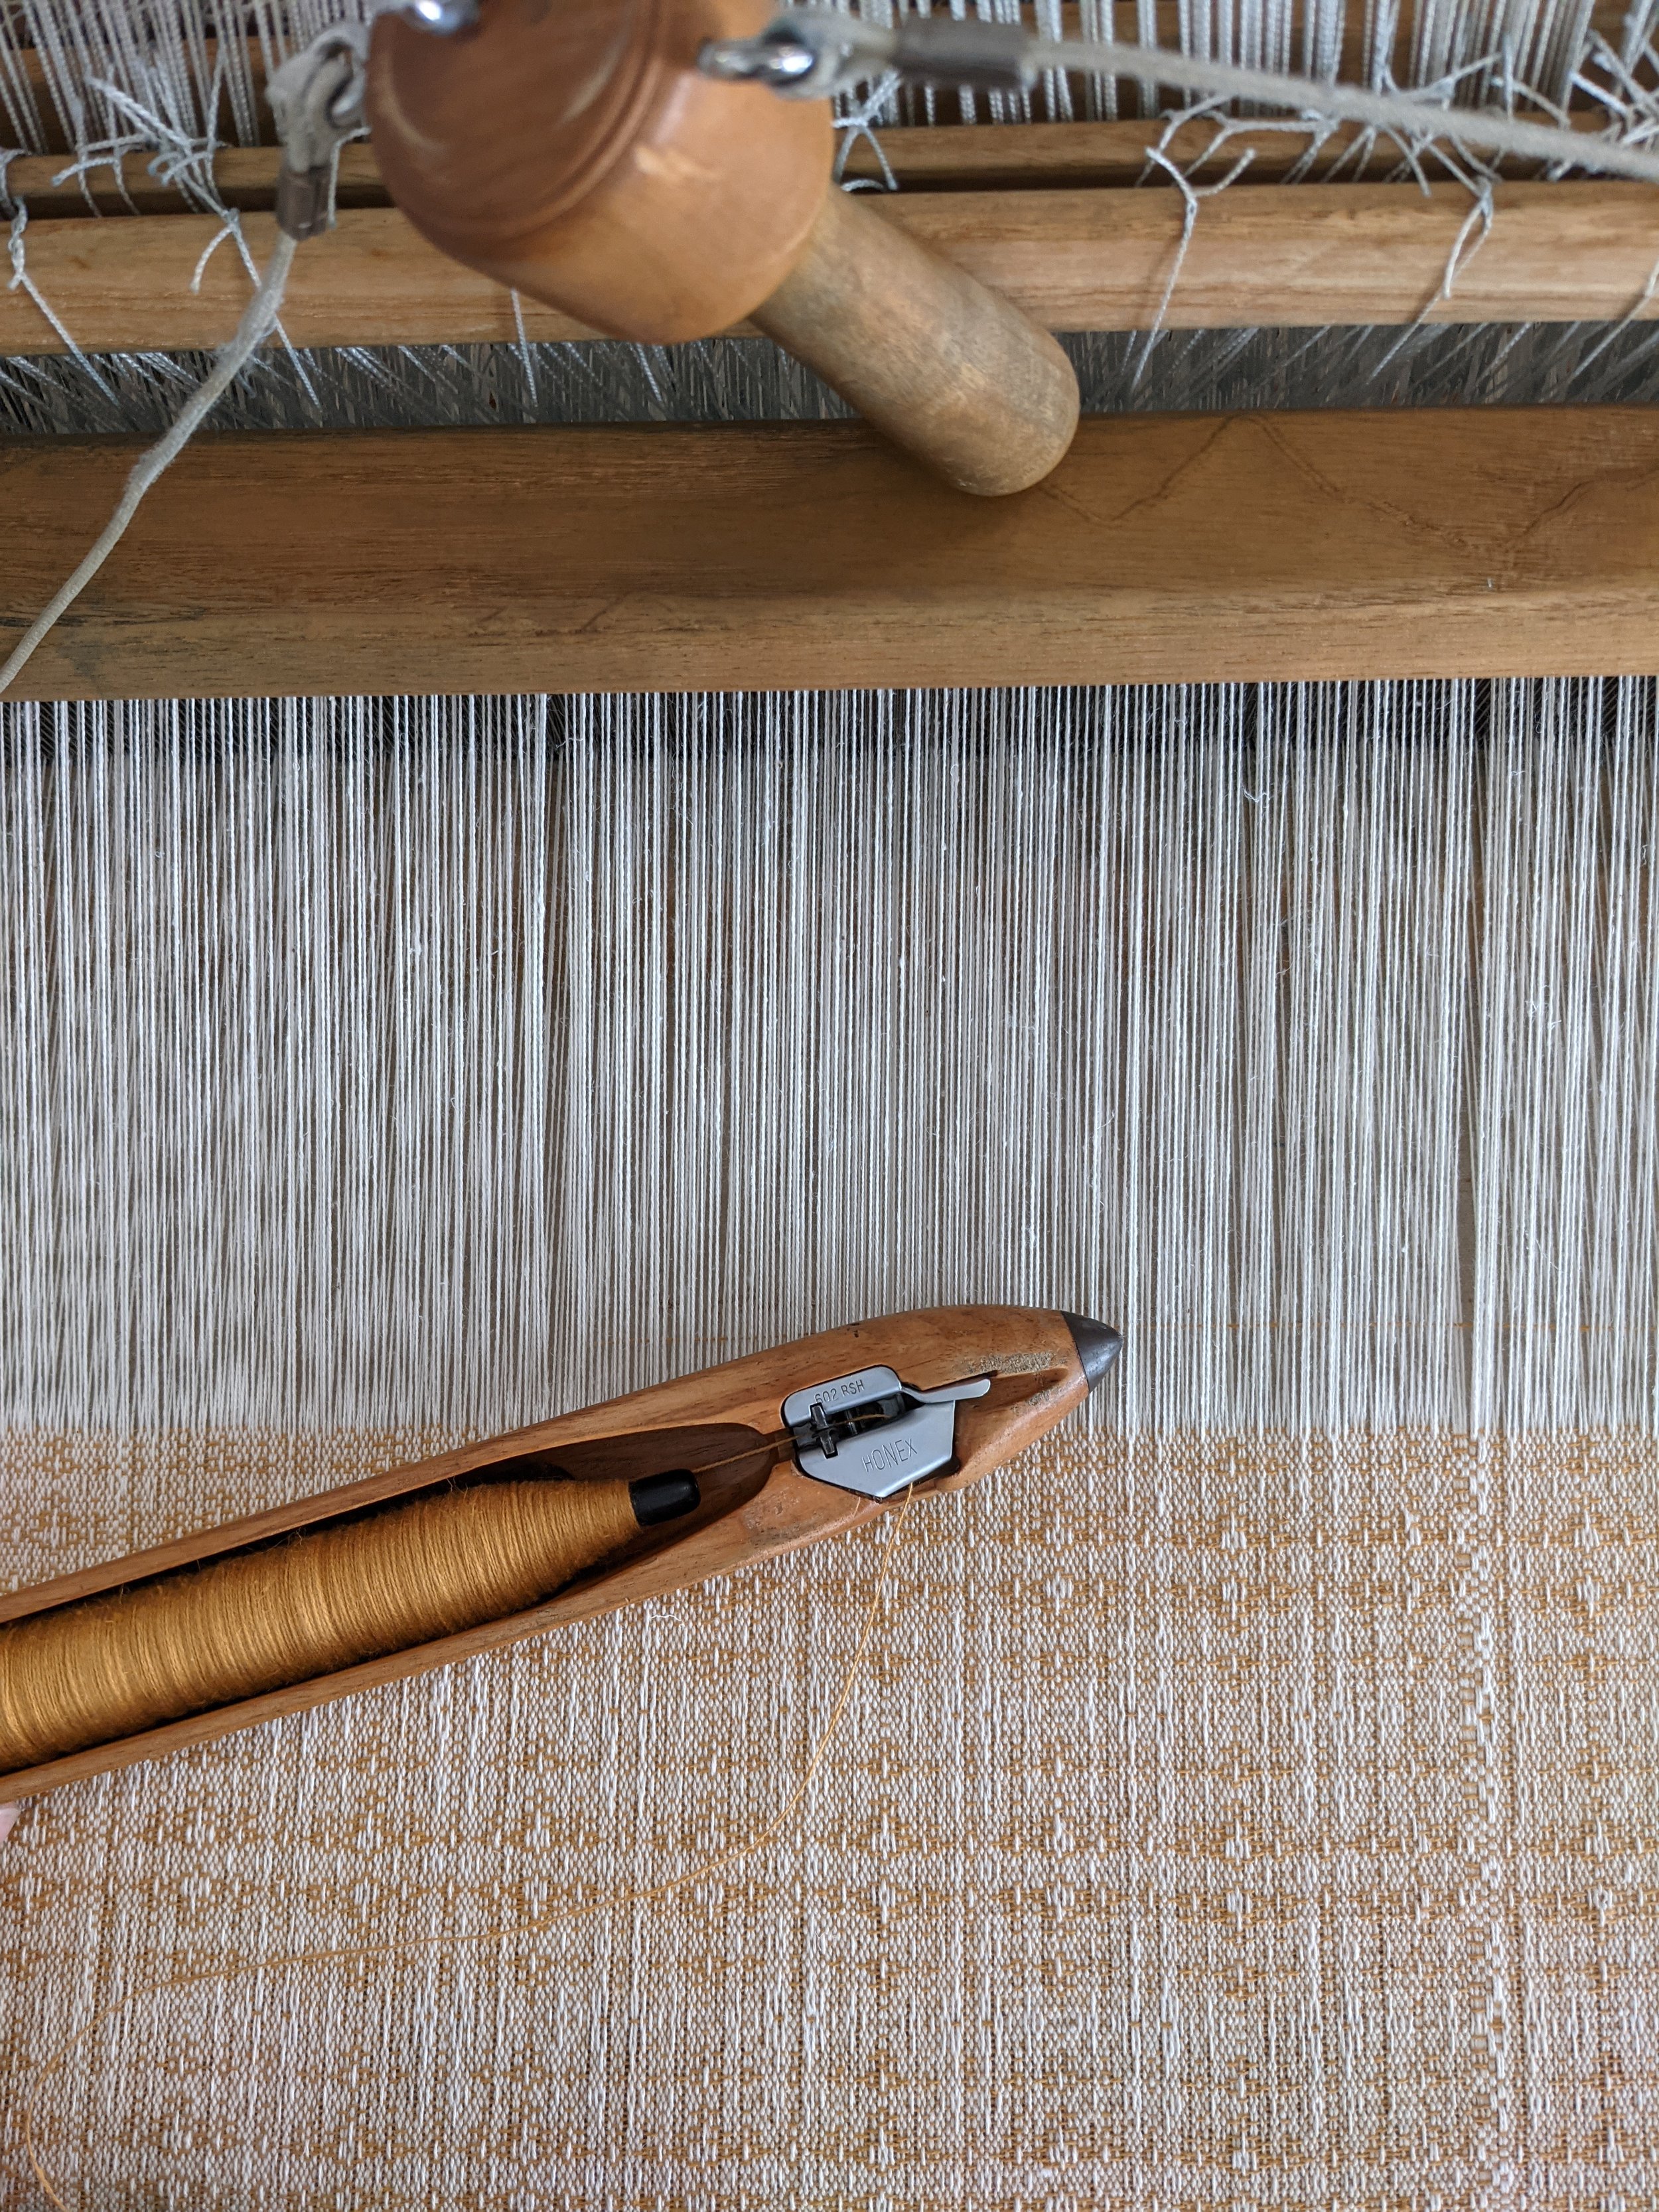 darning — learn about yarn, previous projects, weaving and being a small  business owner — deanna lynch textiles